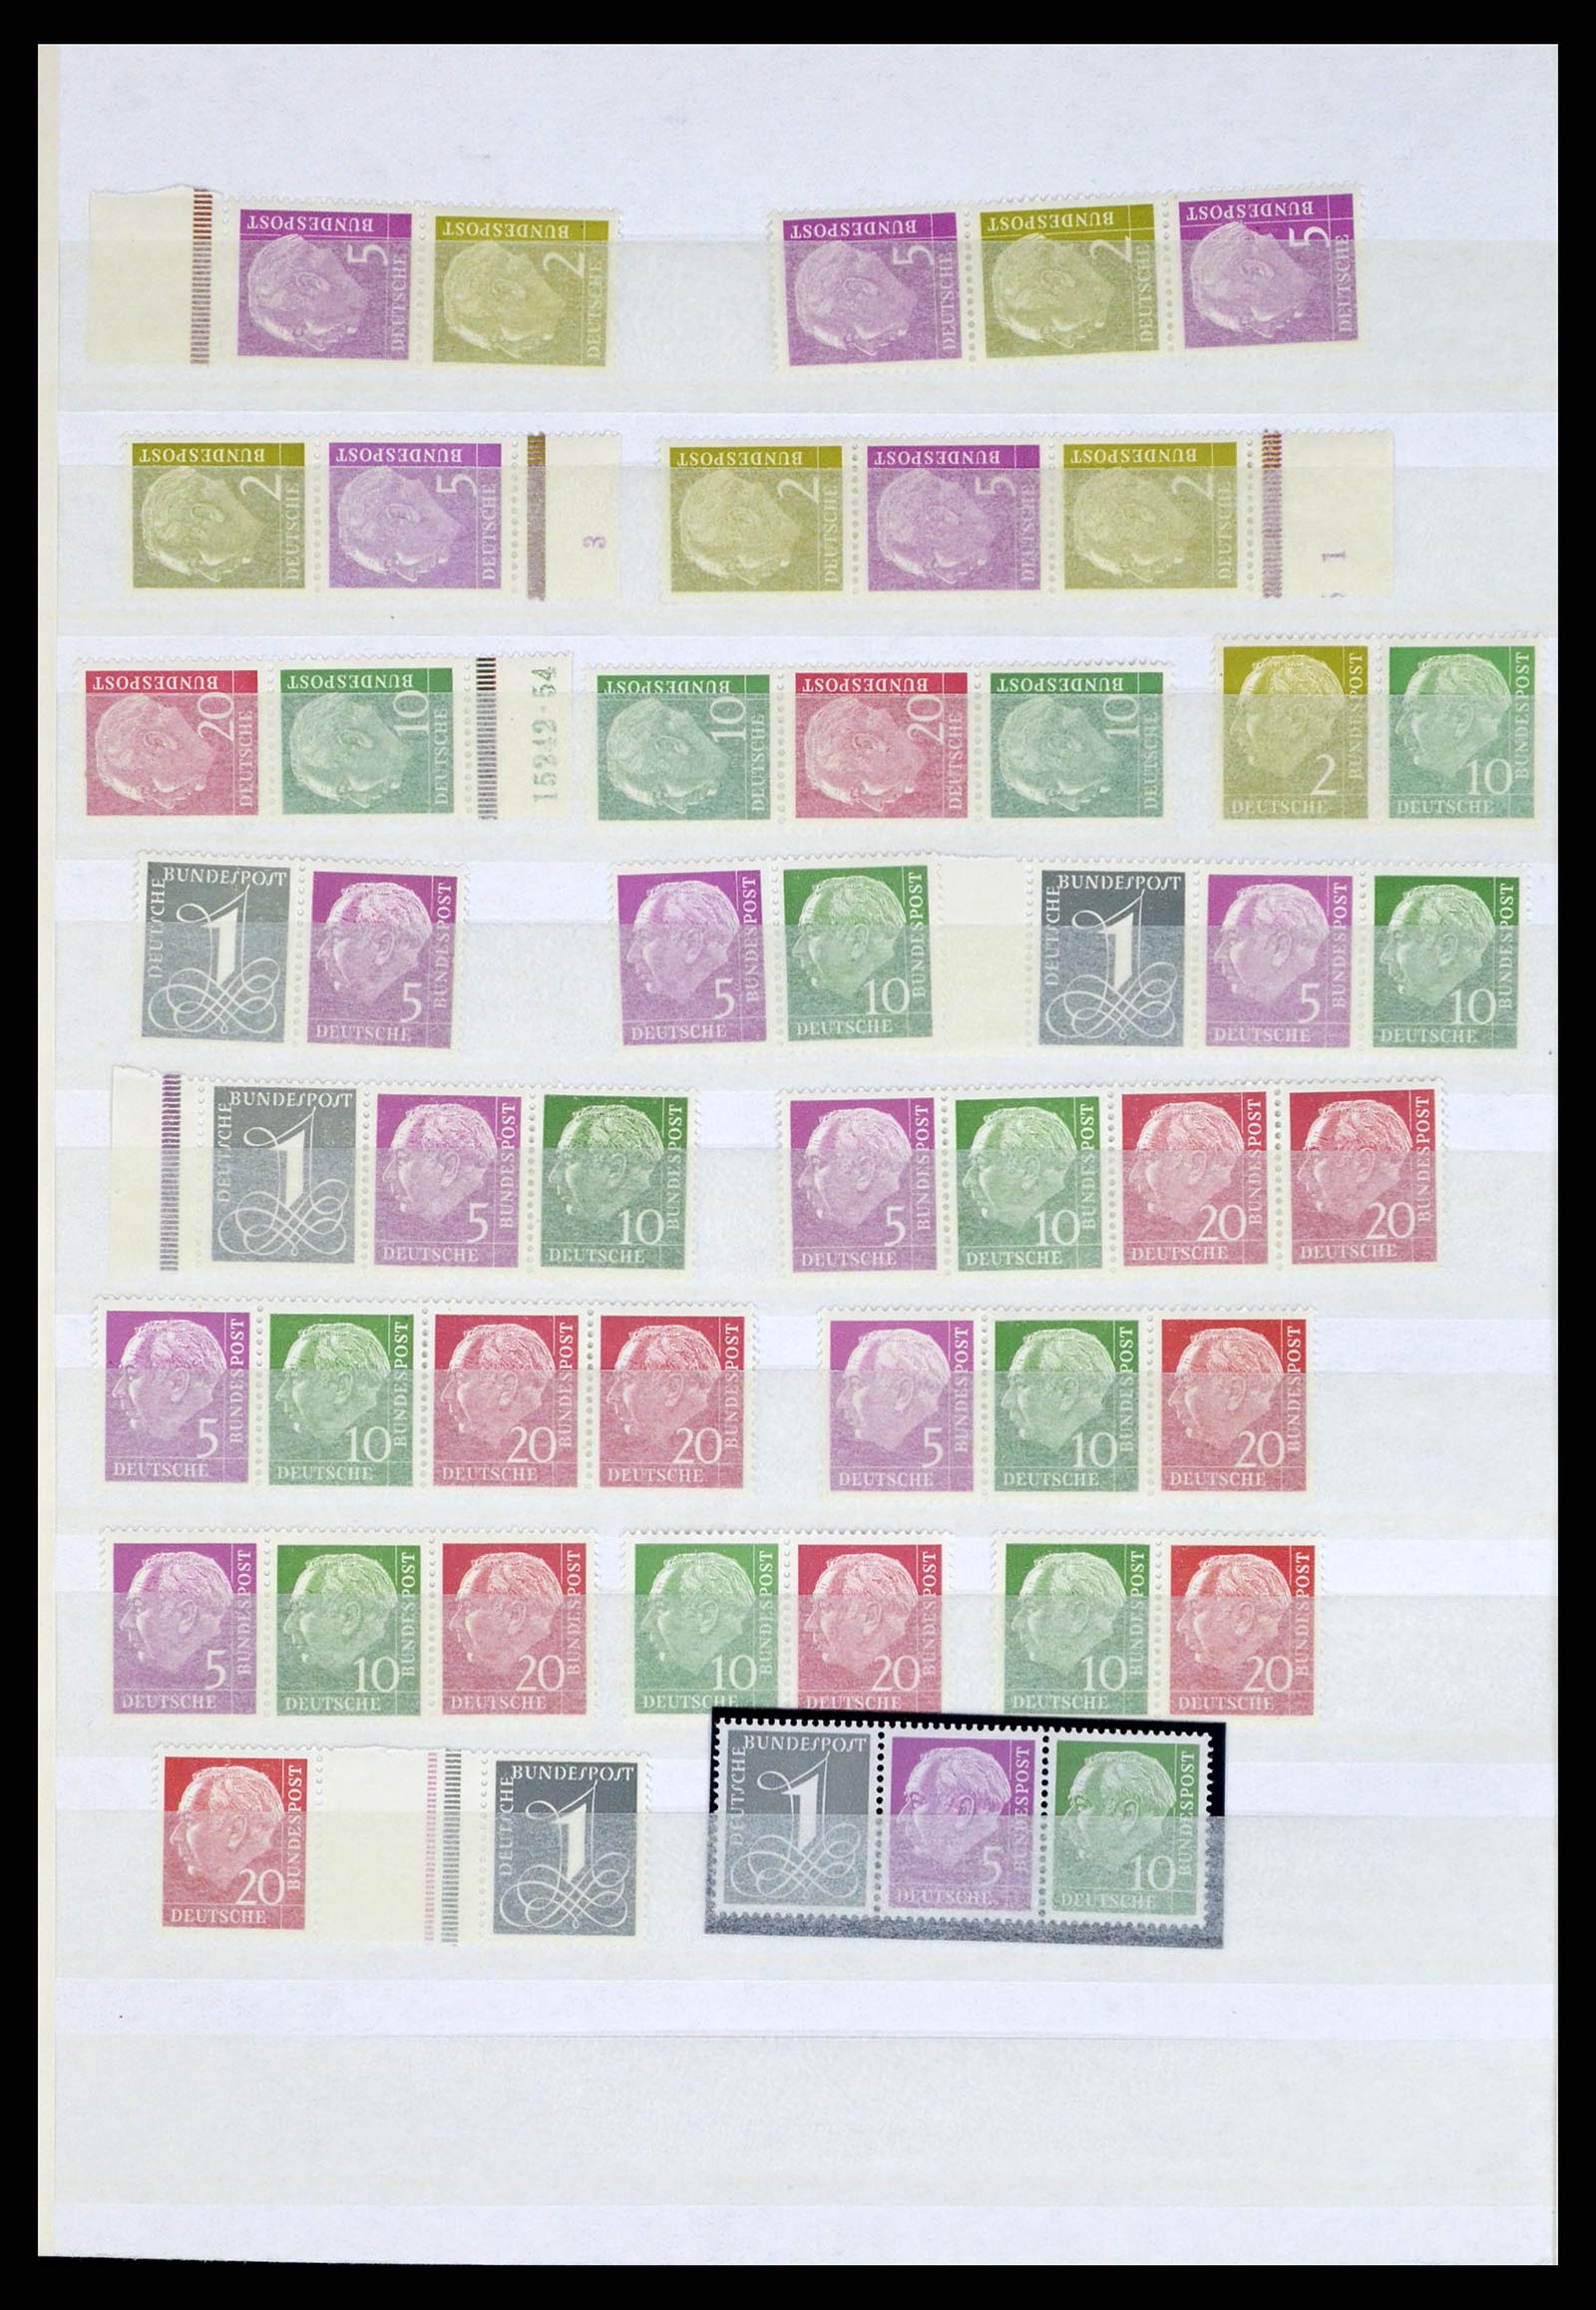 37354 052 - Stamp collection 37354 Bundespost and Berlin 1955-2000.